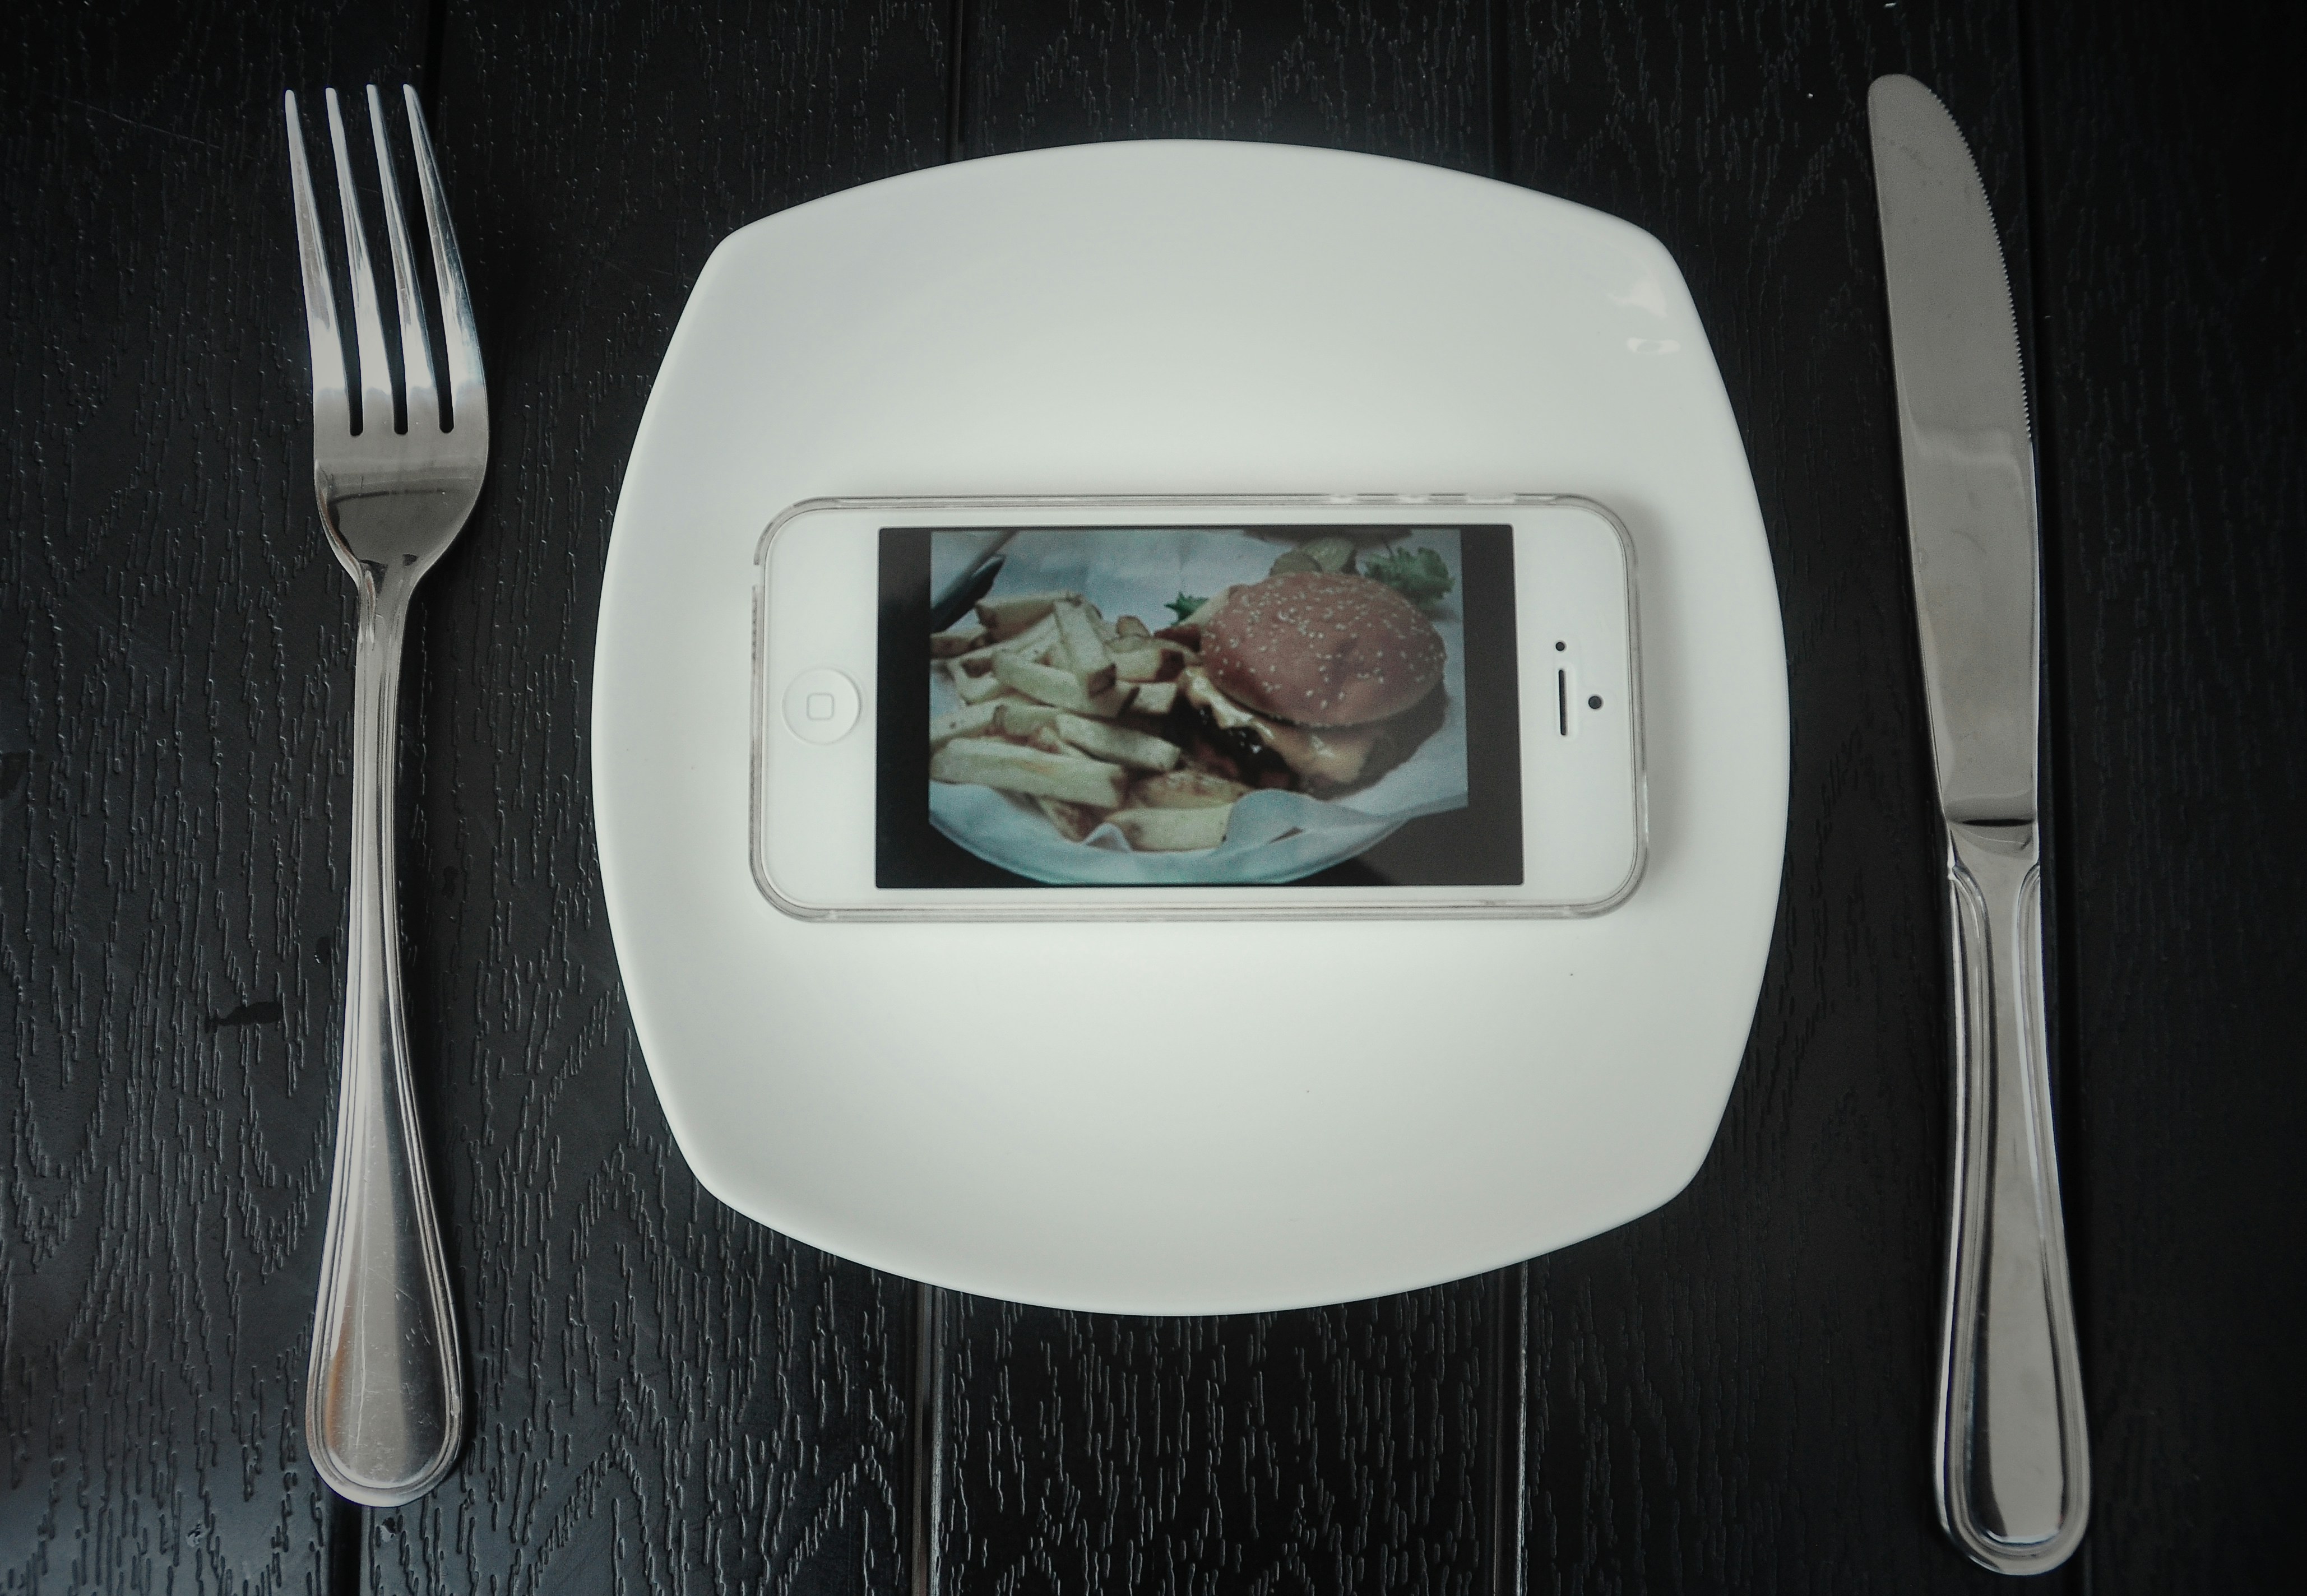 Is technology really upgrading everything in our life, even the food?